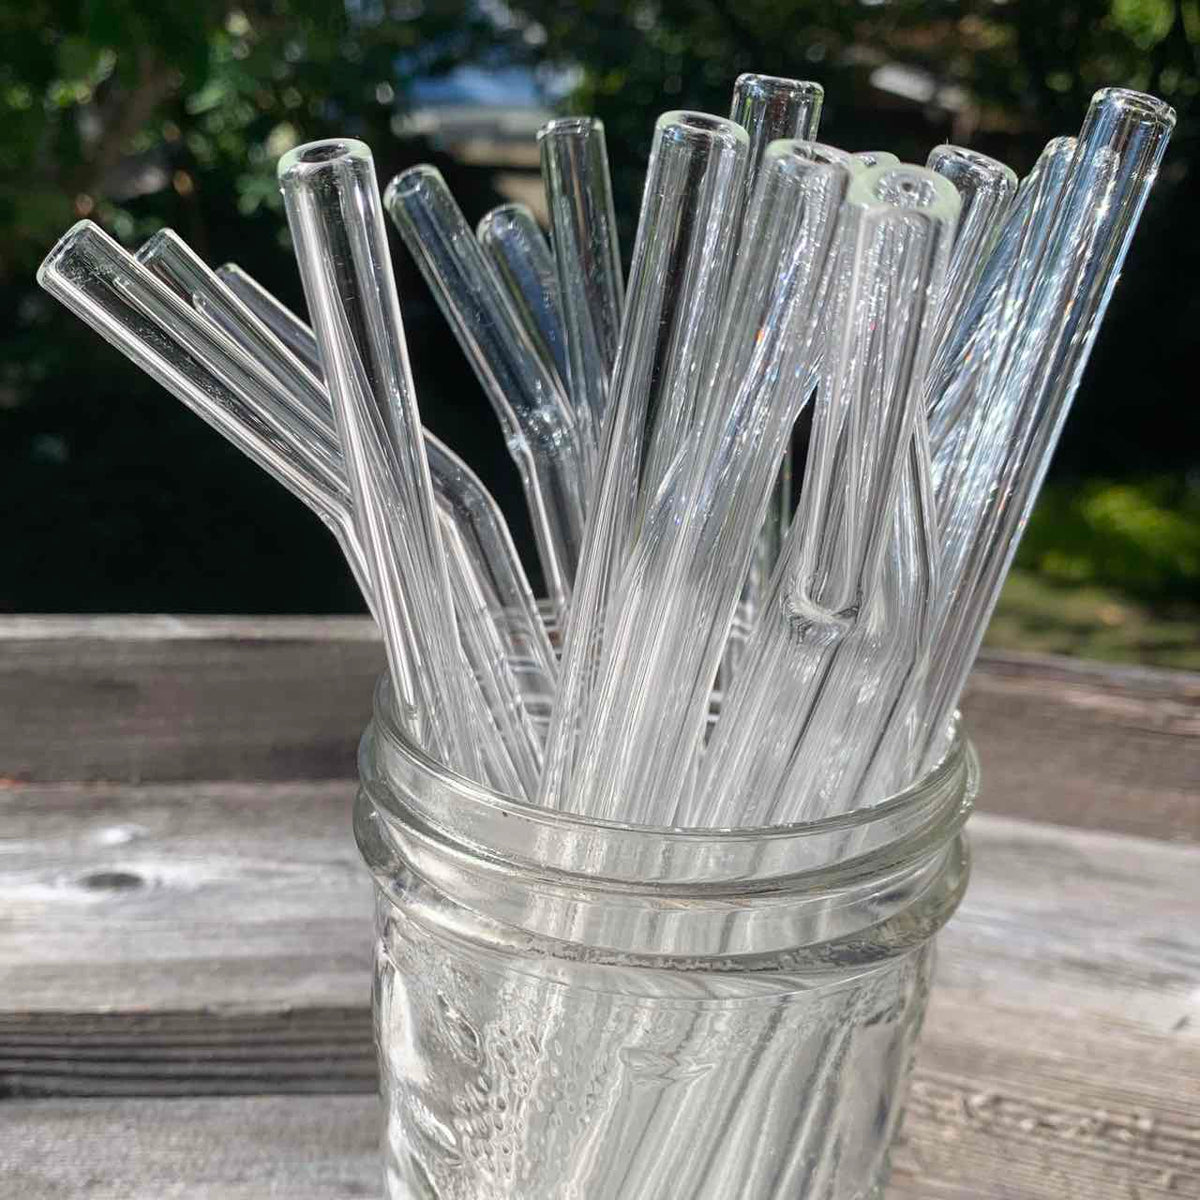 Glass Straws Party Packs - 10 or 20 straws! - GlassSipper